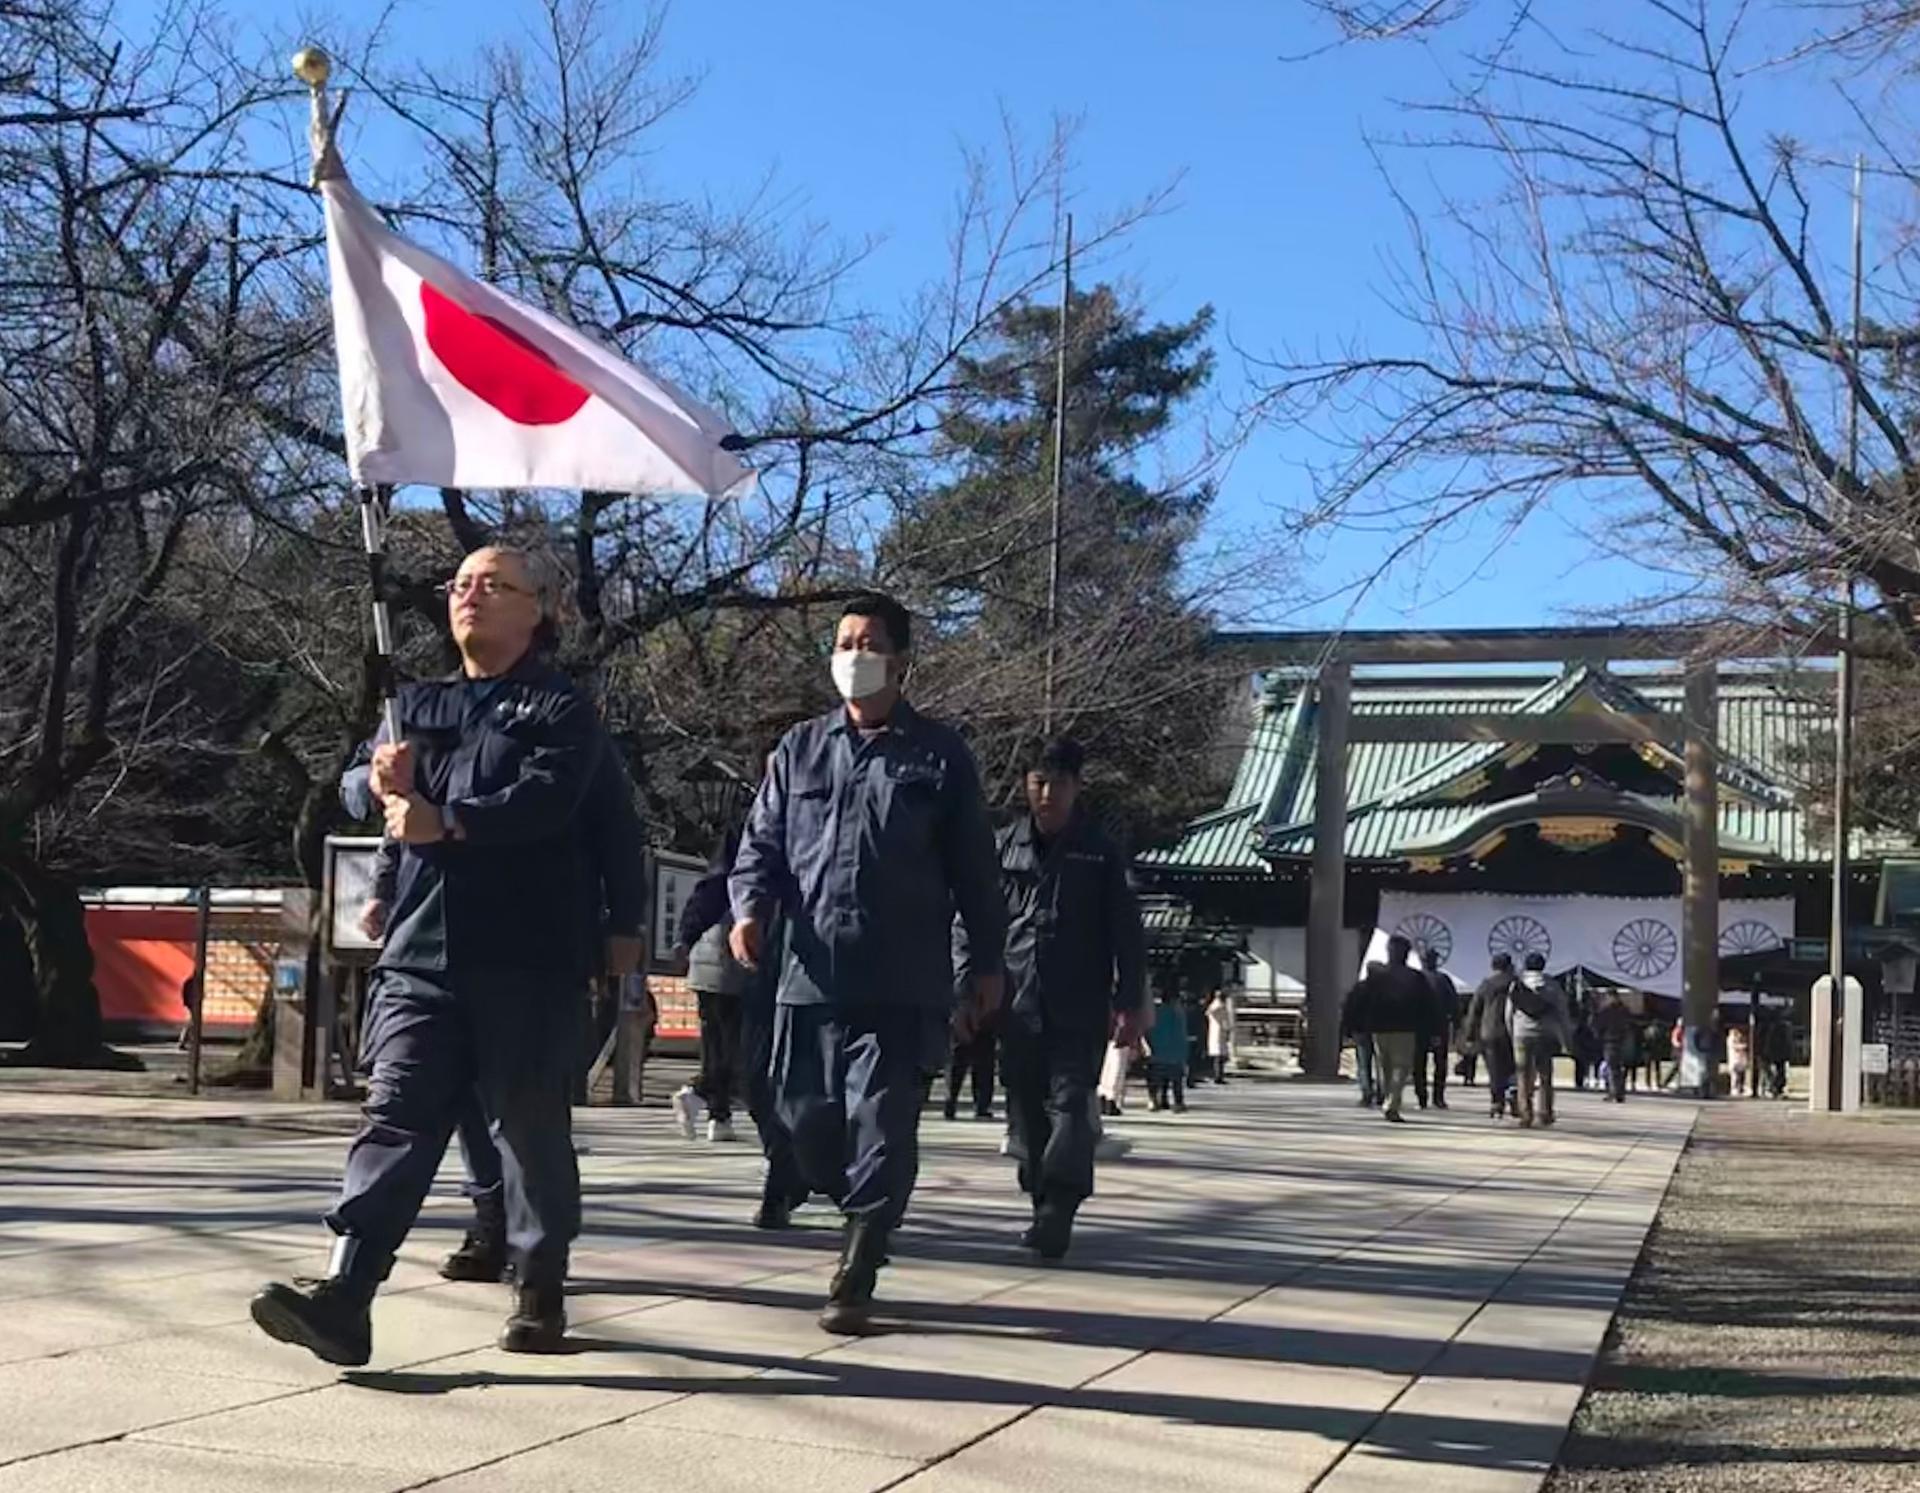 Men in blue jumpsuits march in a line across a plaza. The first in the line holds a Japanese flag above his head.